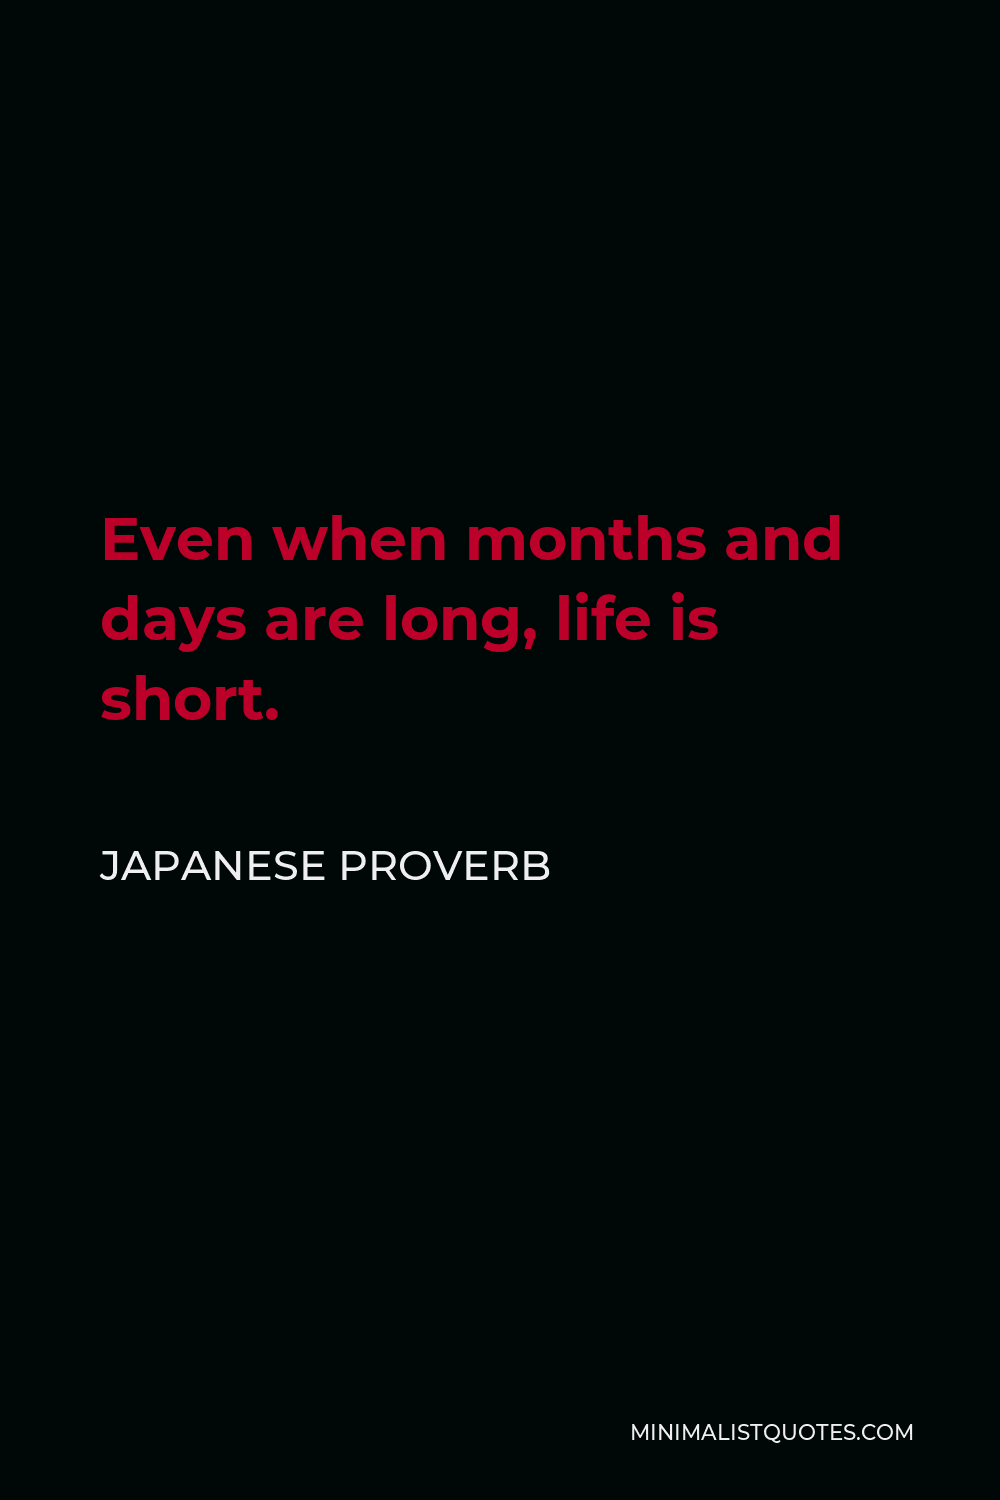 Japanese Proverb Quote - Even when months and days are long, life is short.